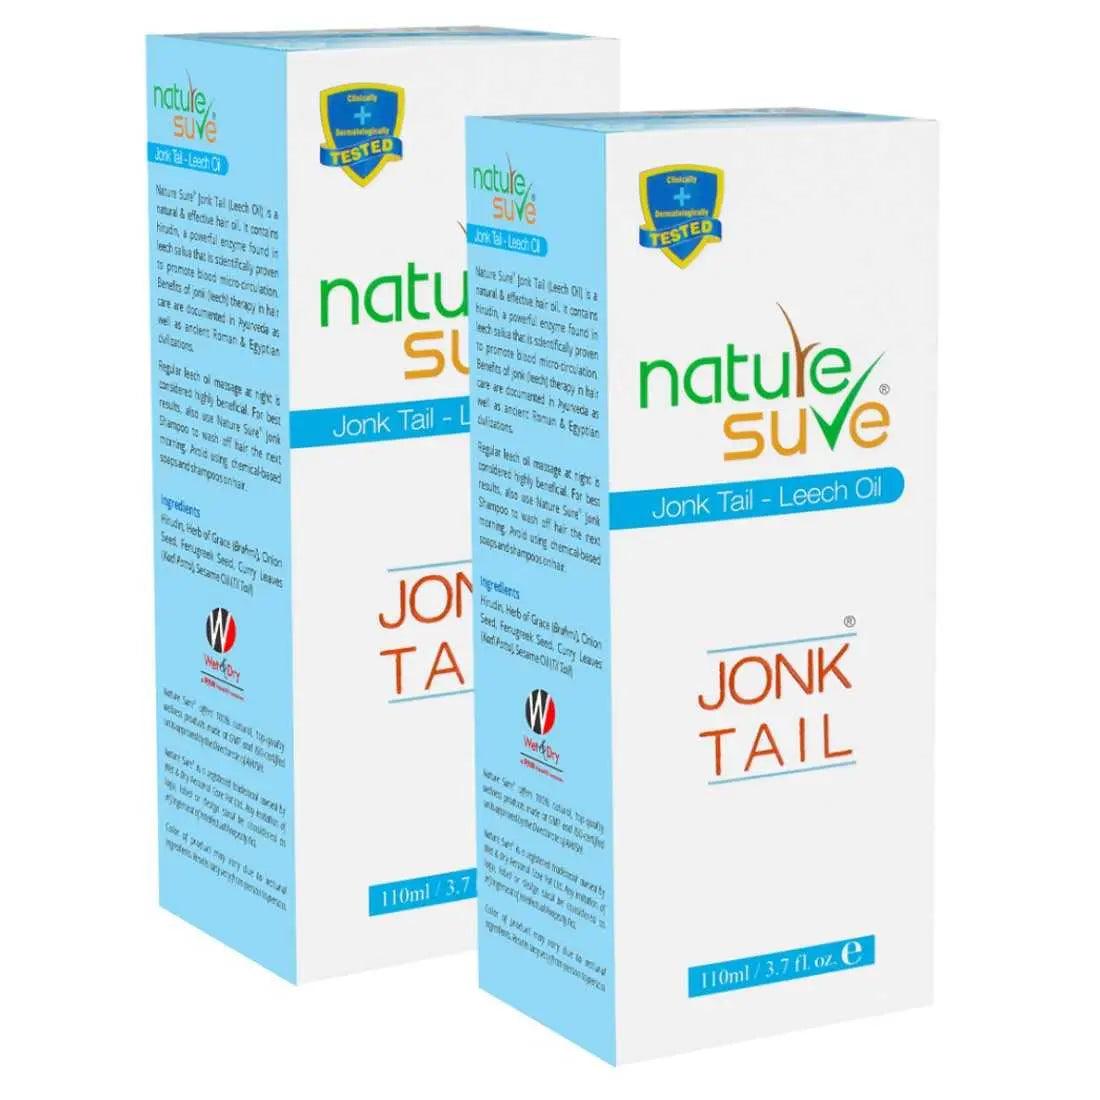 Nature Sure Jonk Tail for Hair Problems in Men and Women - 110ml 8903540008524